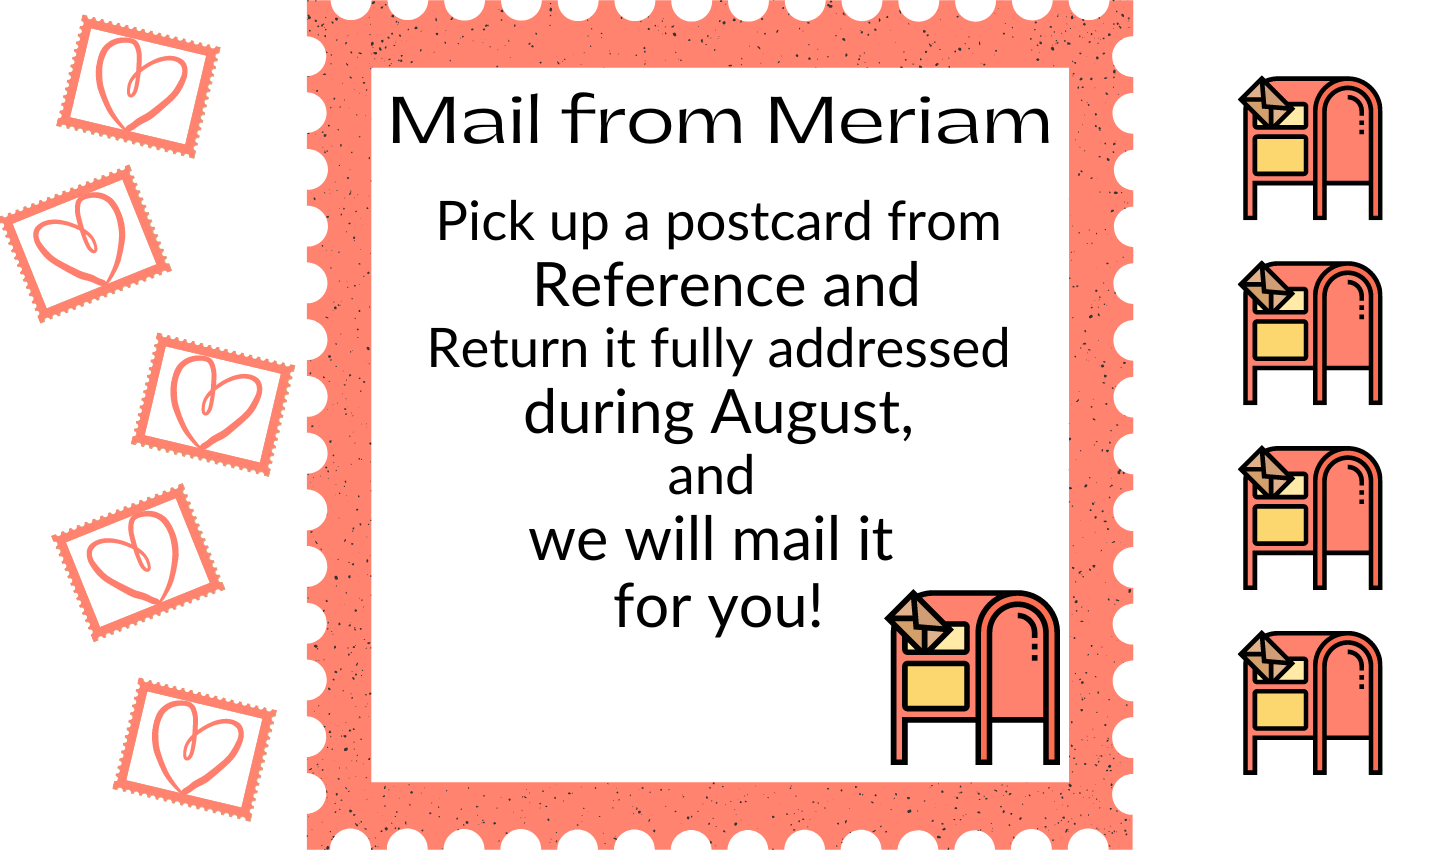 Mail from Meriam